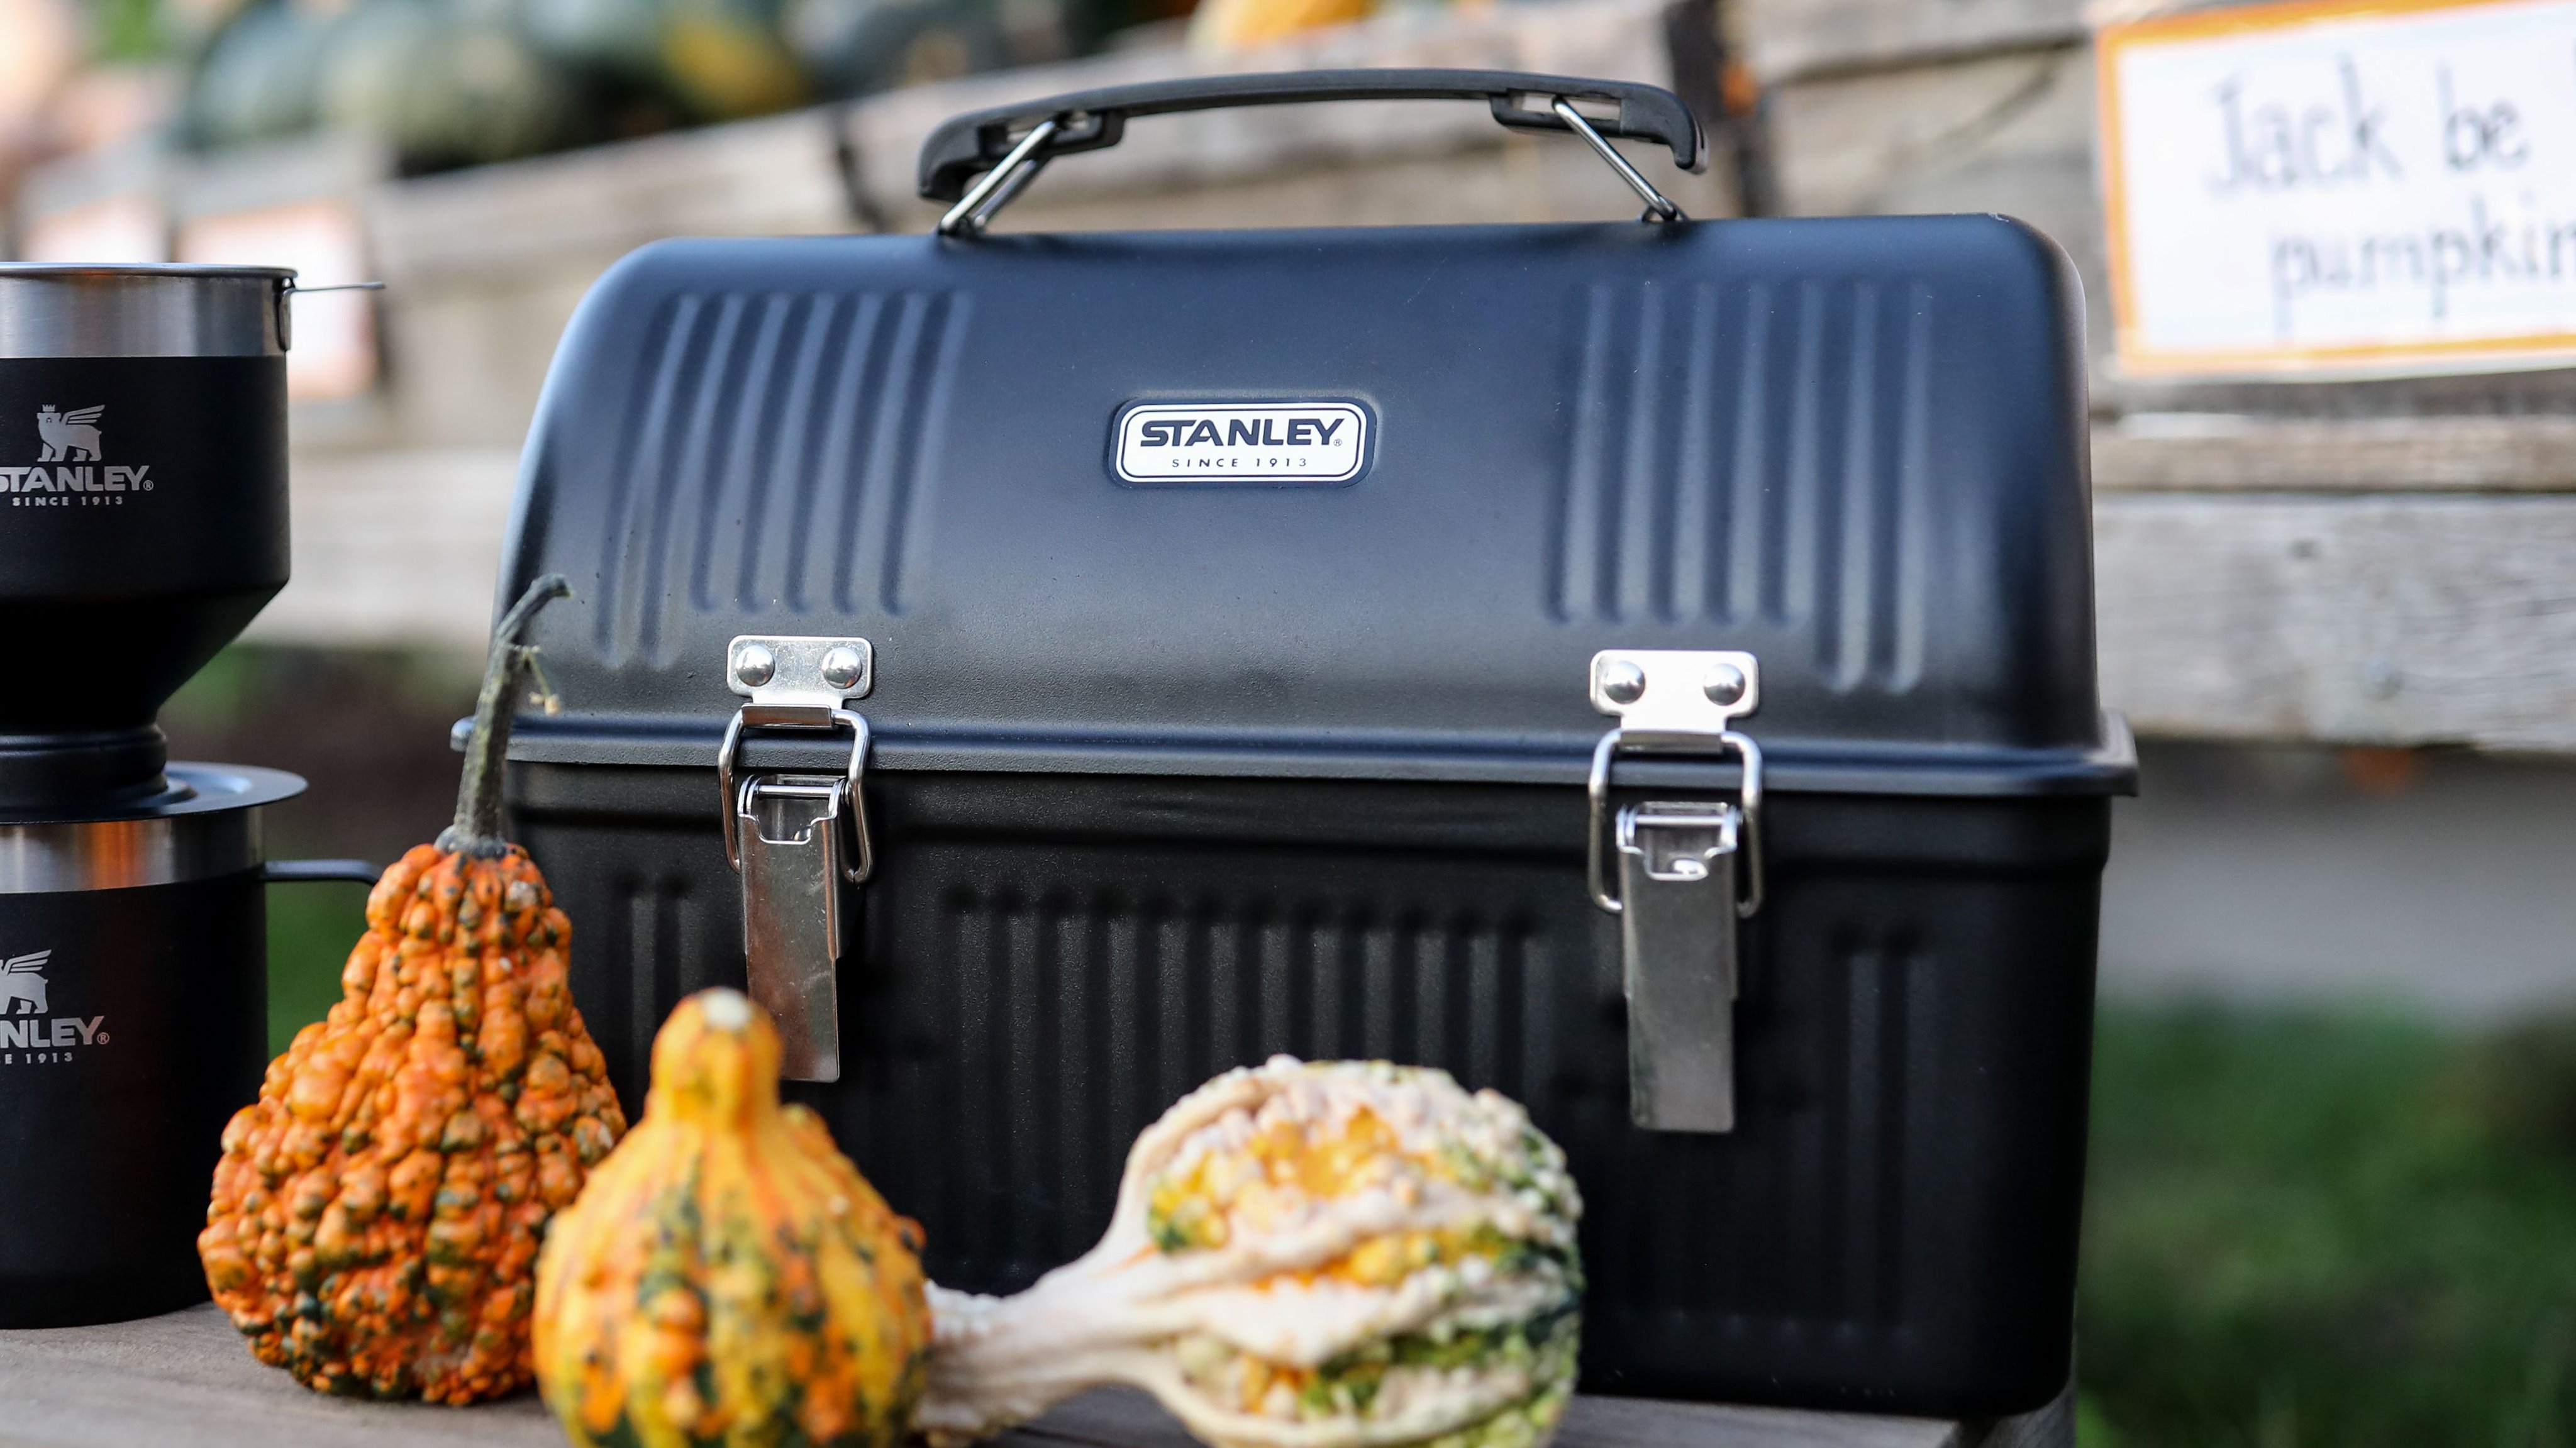 Stanley 1913 on X: Always timeless, durable and classic, our Lunch Box  just got a stylish Matte Black upgrade. Shop the new Matte Black Lunch Box:    / X